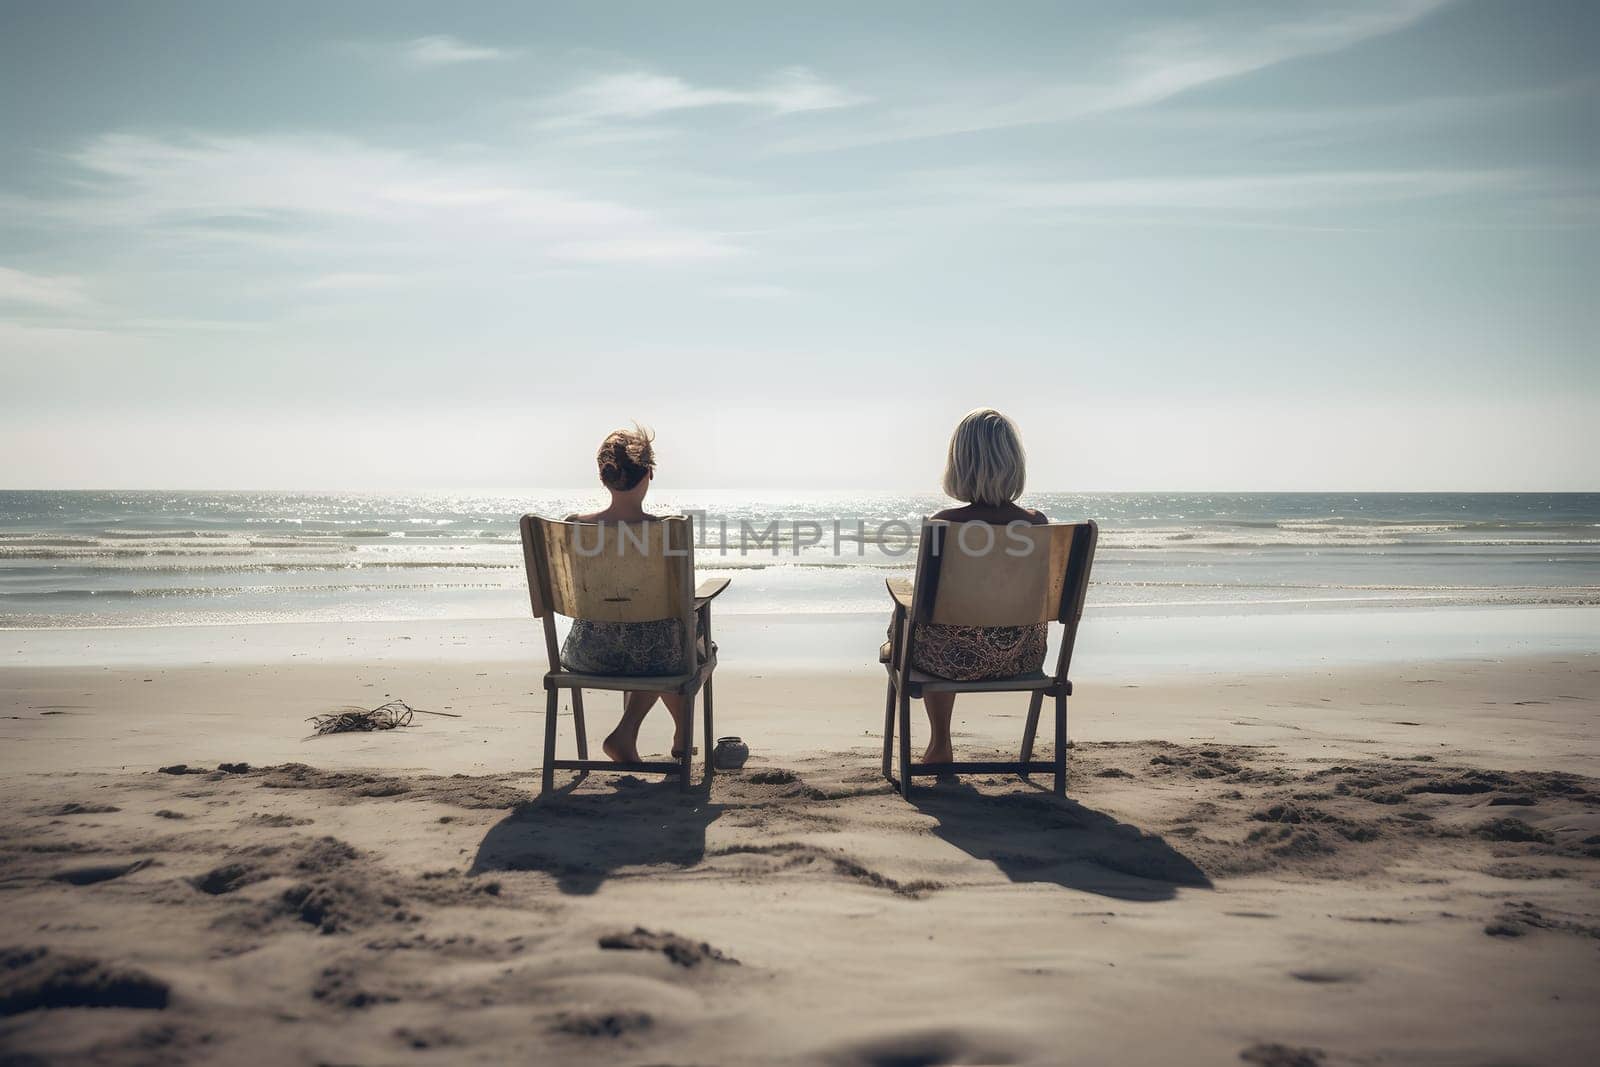 two women sitting on chairs at beach looking at sea horizon. Neural network generated in May 2023. Not based on any actual person, scene or pattern.